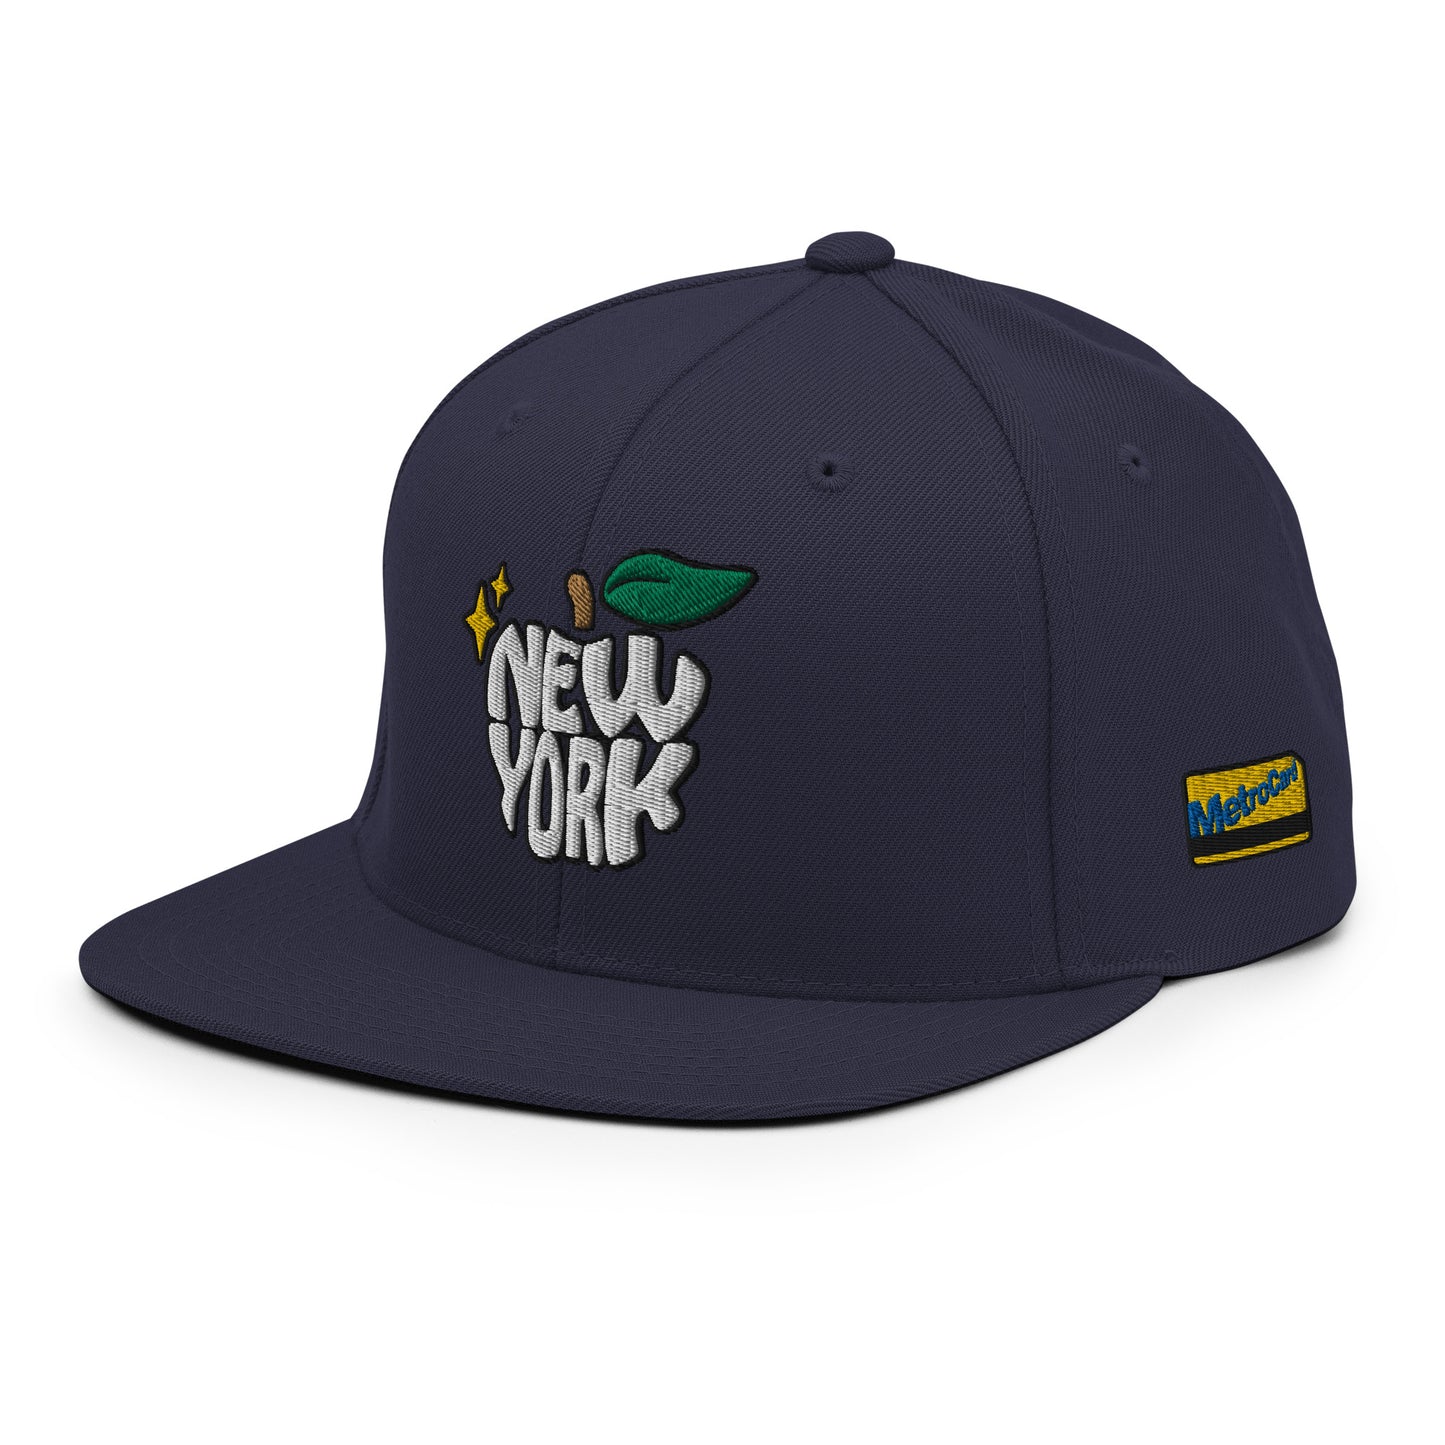 New York Apple Logo Embroidered Navy Blue Snapback Hat (Metro Card) Scattered Streetwear